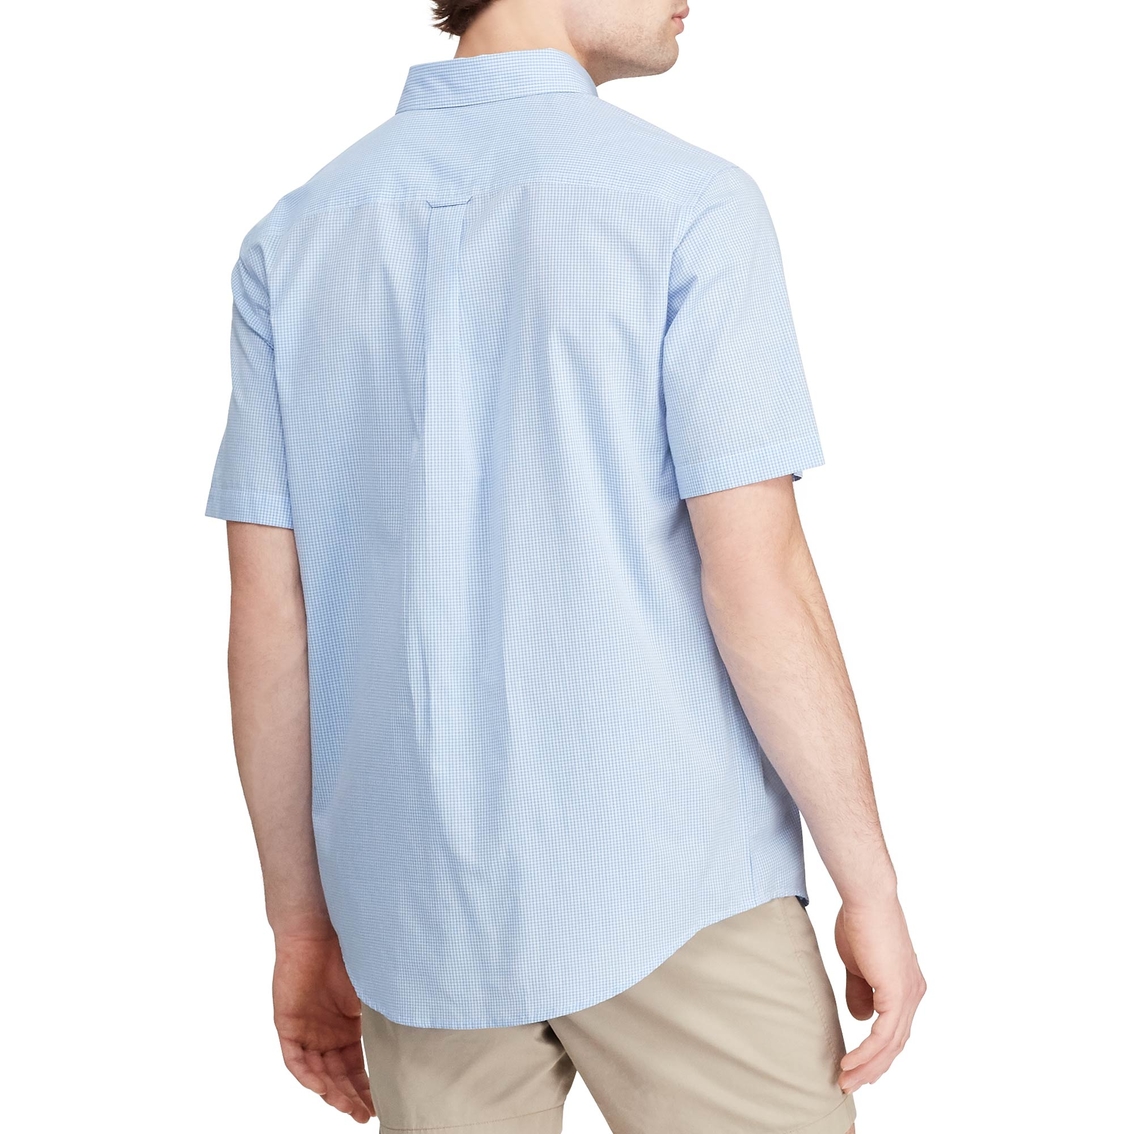 Chaps Easy Care Woven Button Down Shirt - Image 2 of 2